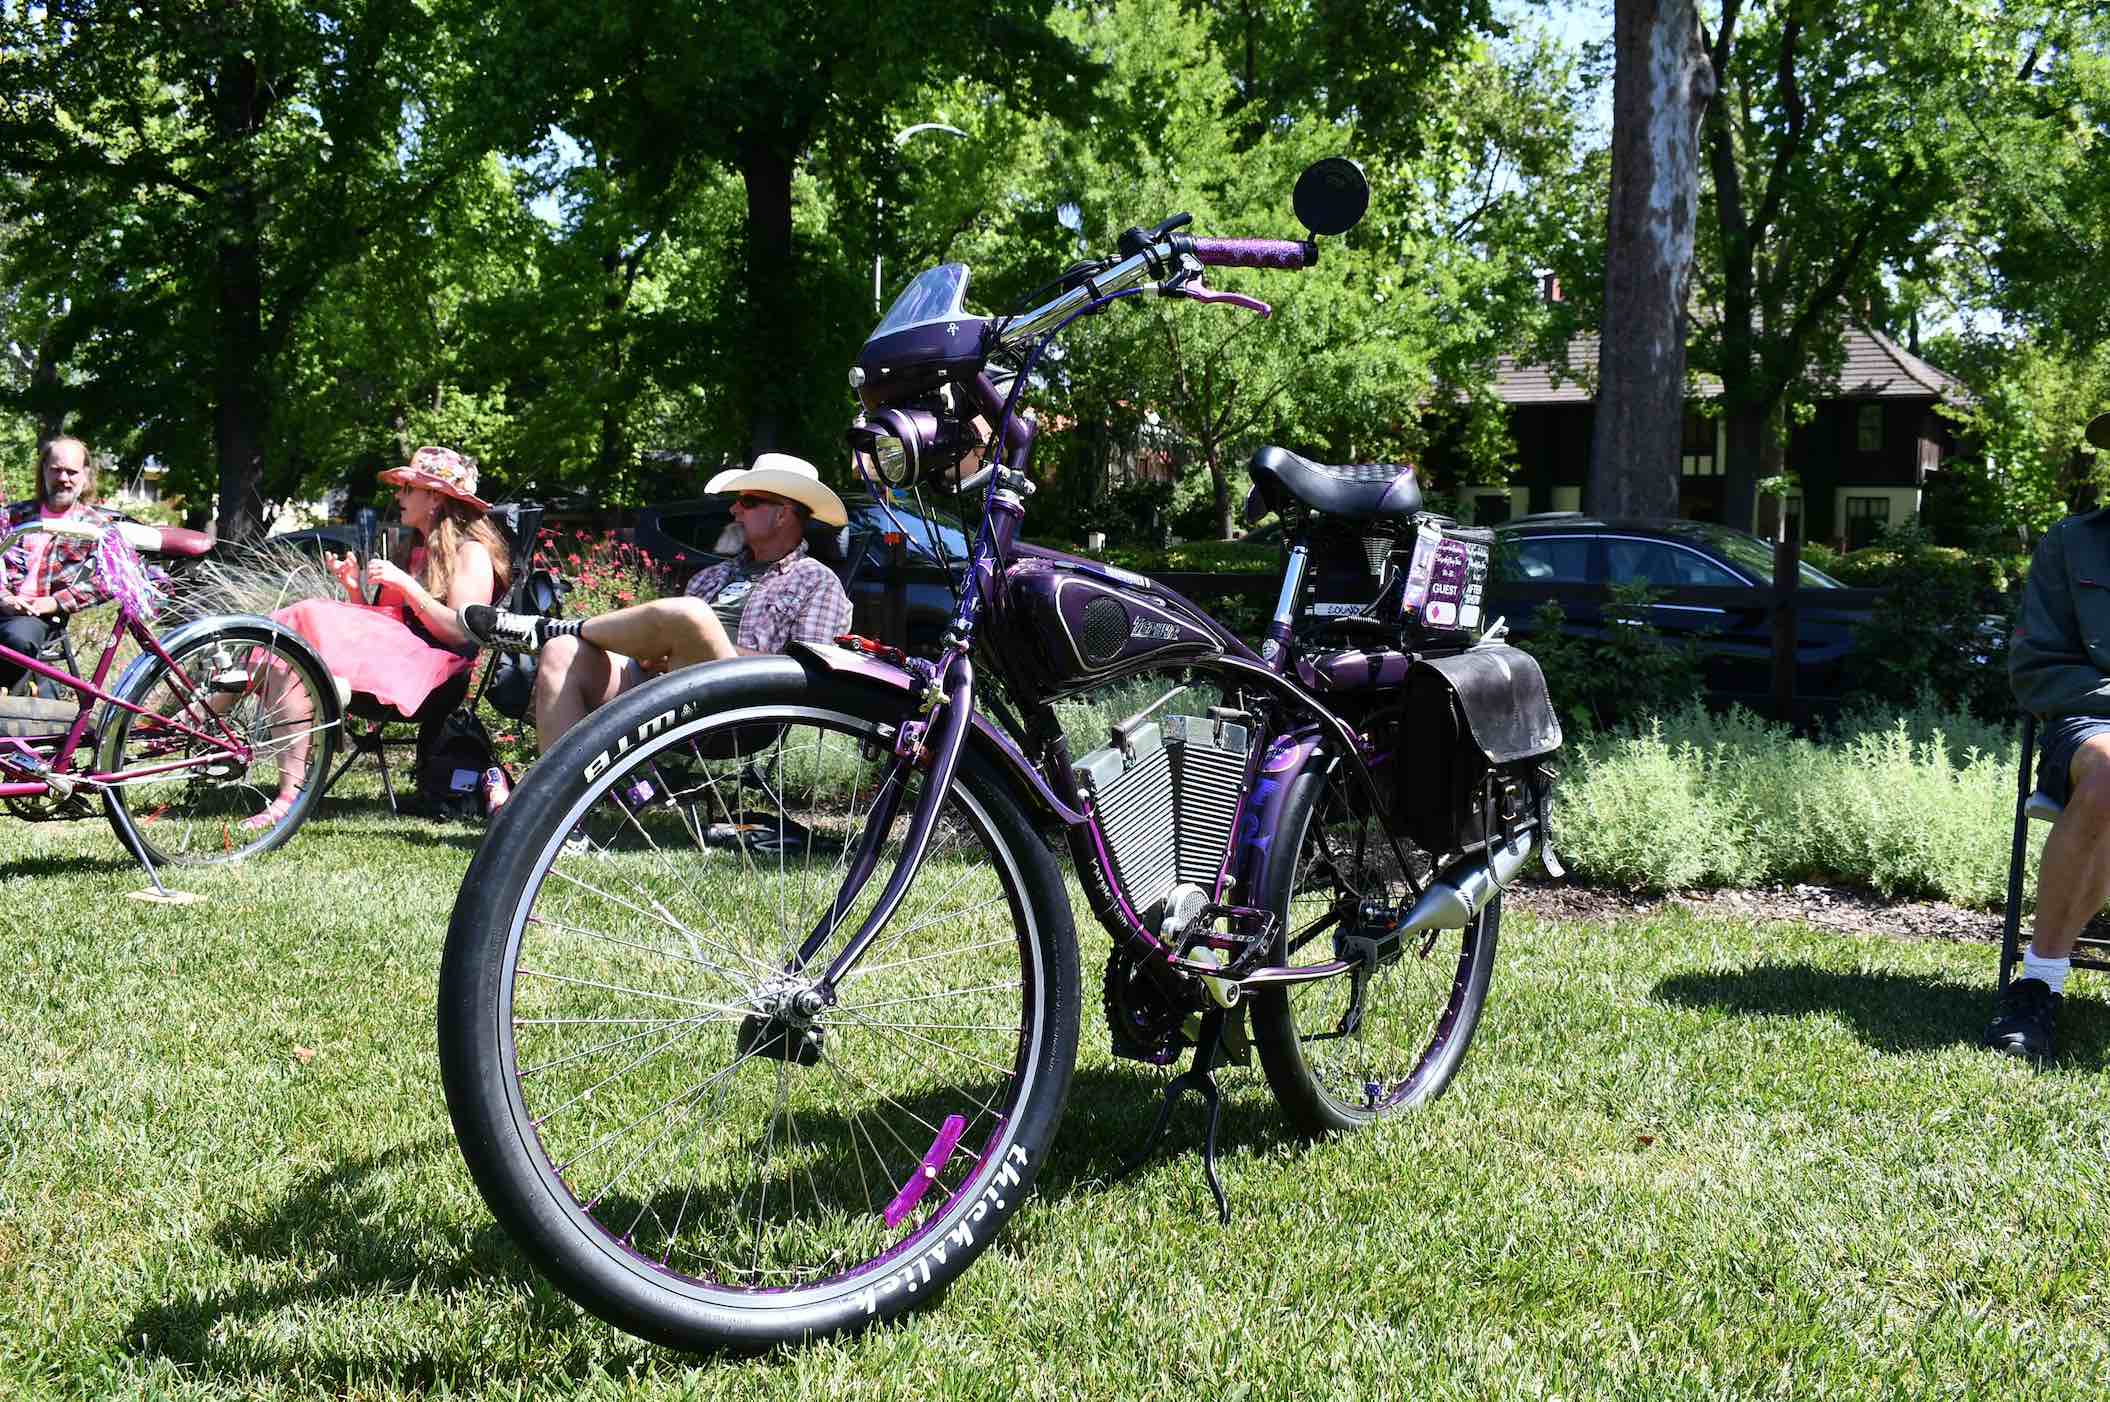 Purple bike similar to a motorcycle propped on grass